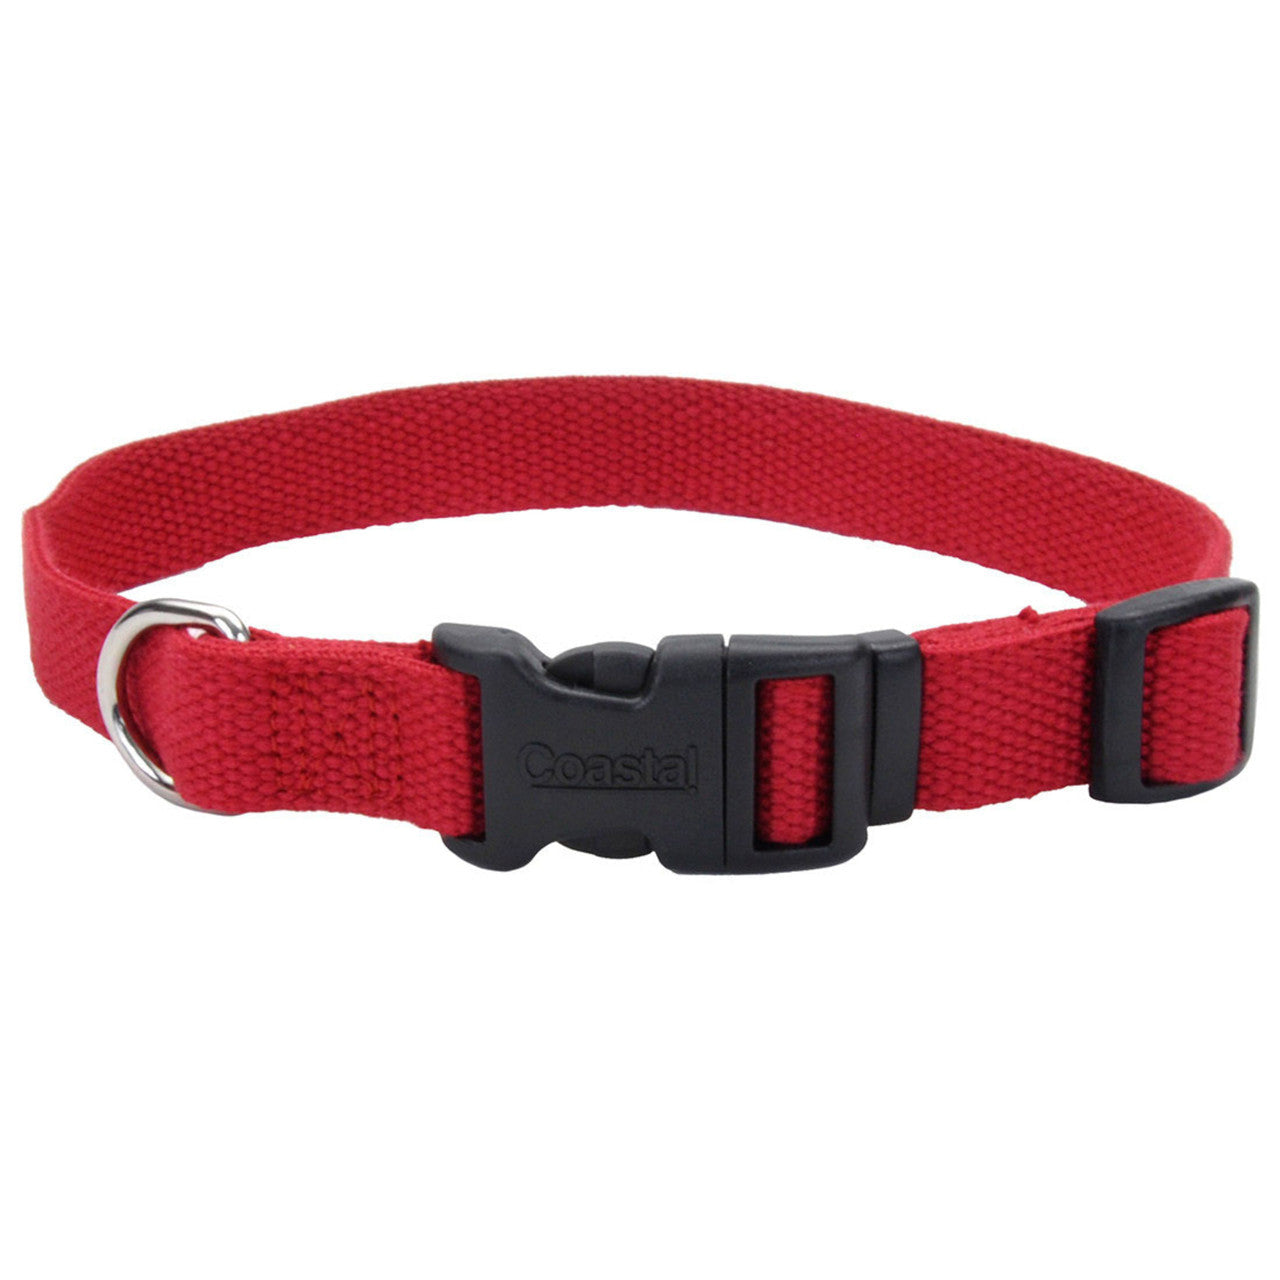 New Earth Soy Adjustable Dog Collar Cranberry 5/8 in x 8-12 in